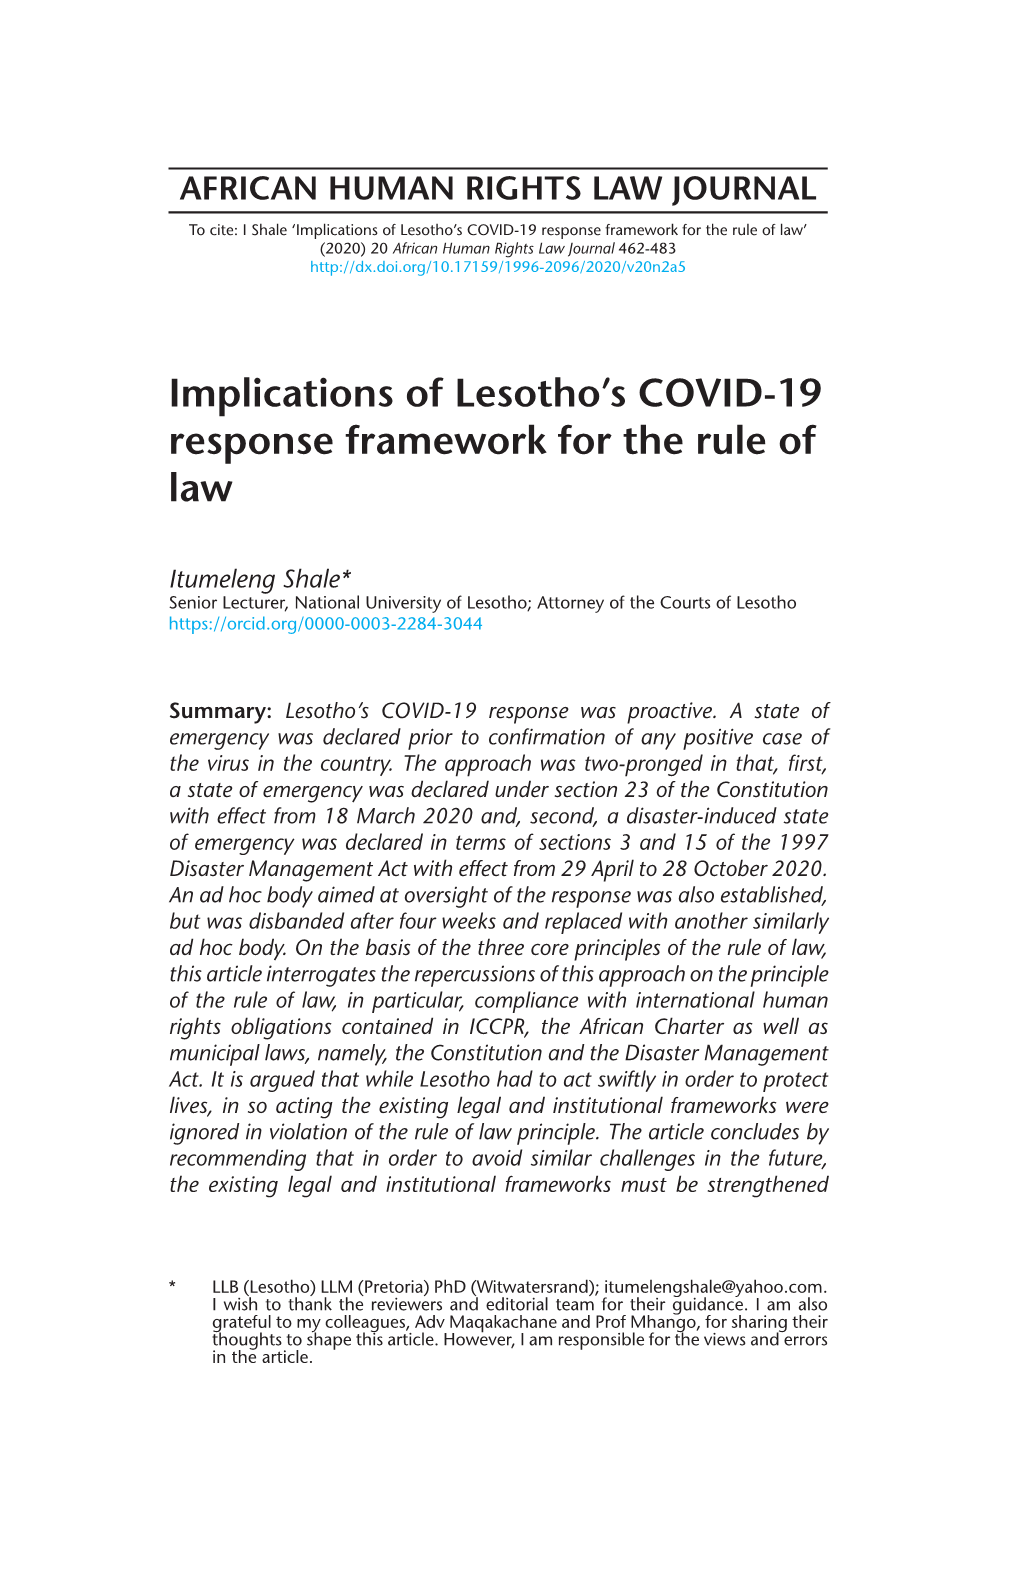 'Implications of Lesotho's COVID-19 Response Framework for the Rule Of